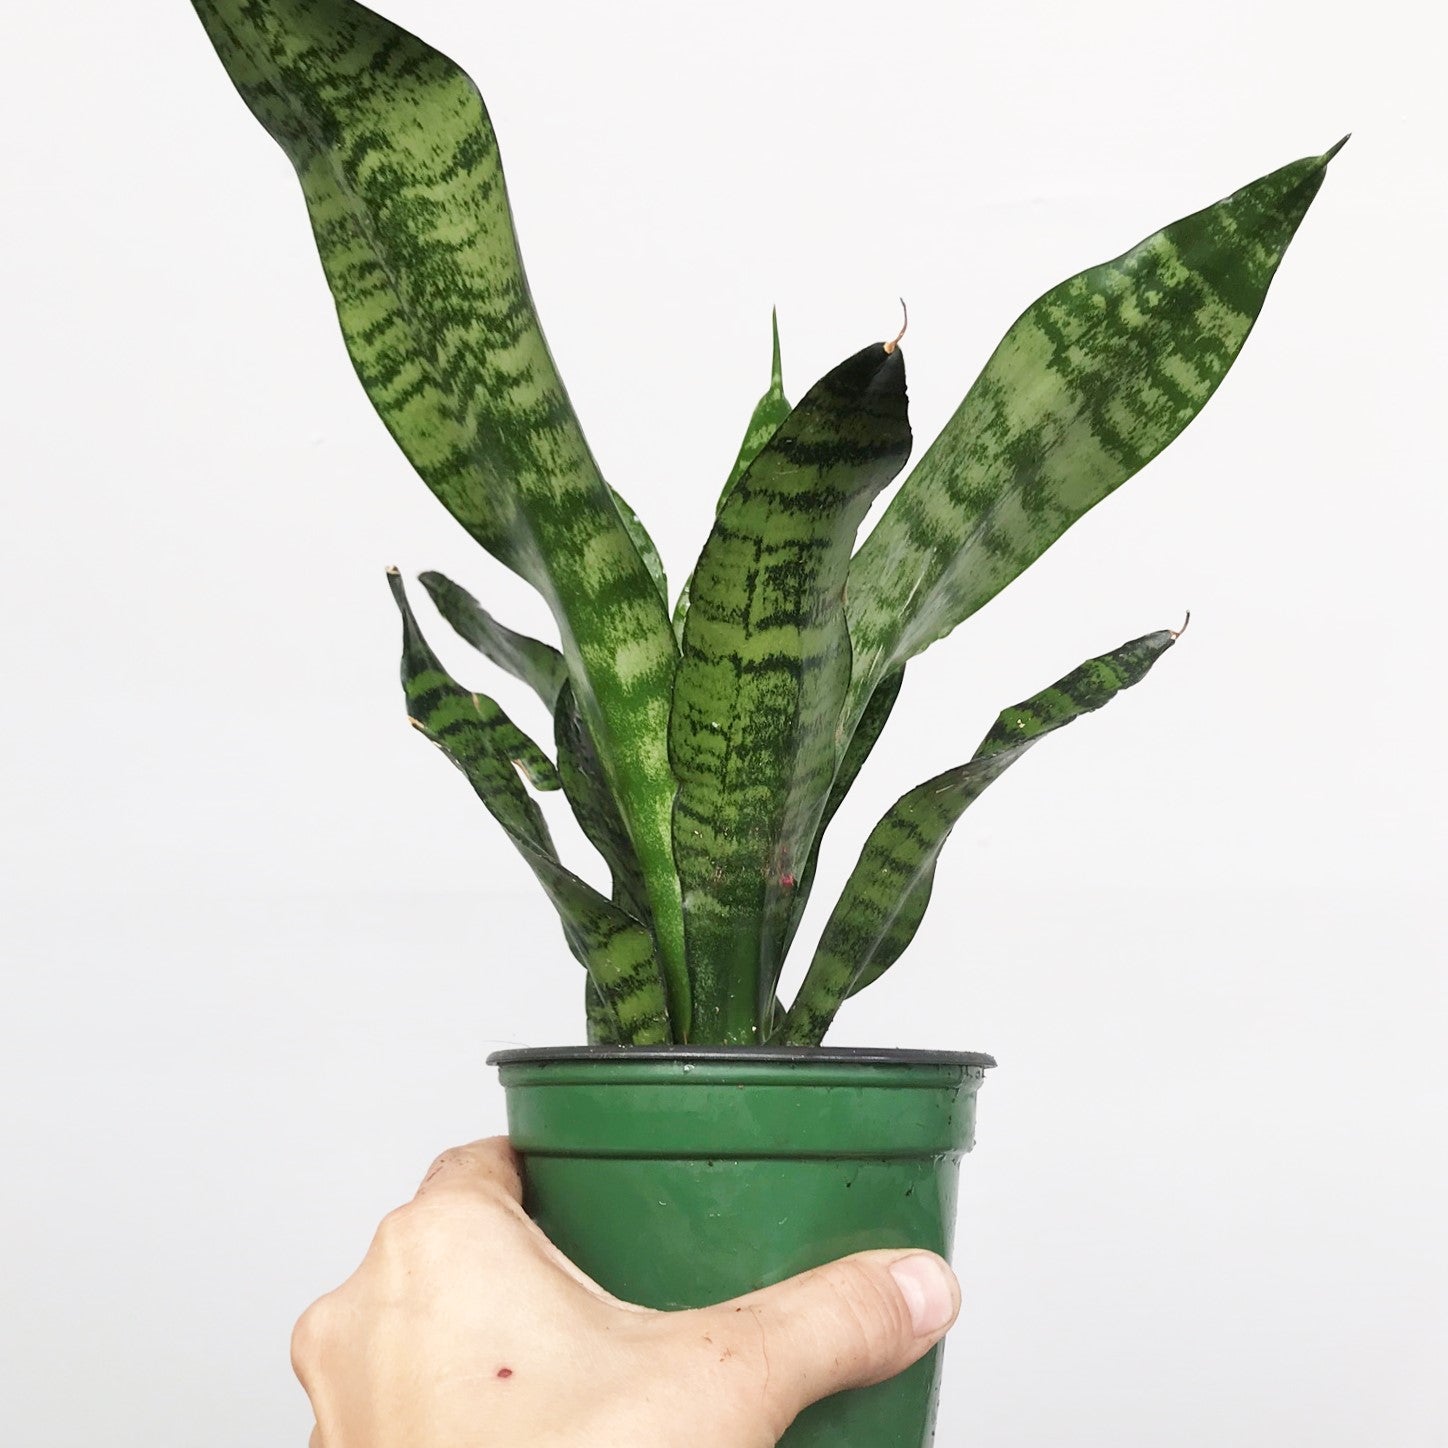 Sansevieria trifasciata 'Black Coral' - Snake Plant, Mother-in-Law's Tongue